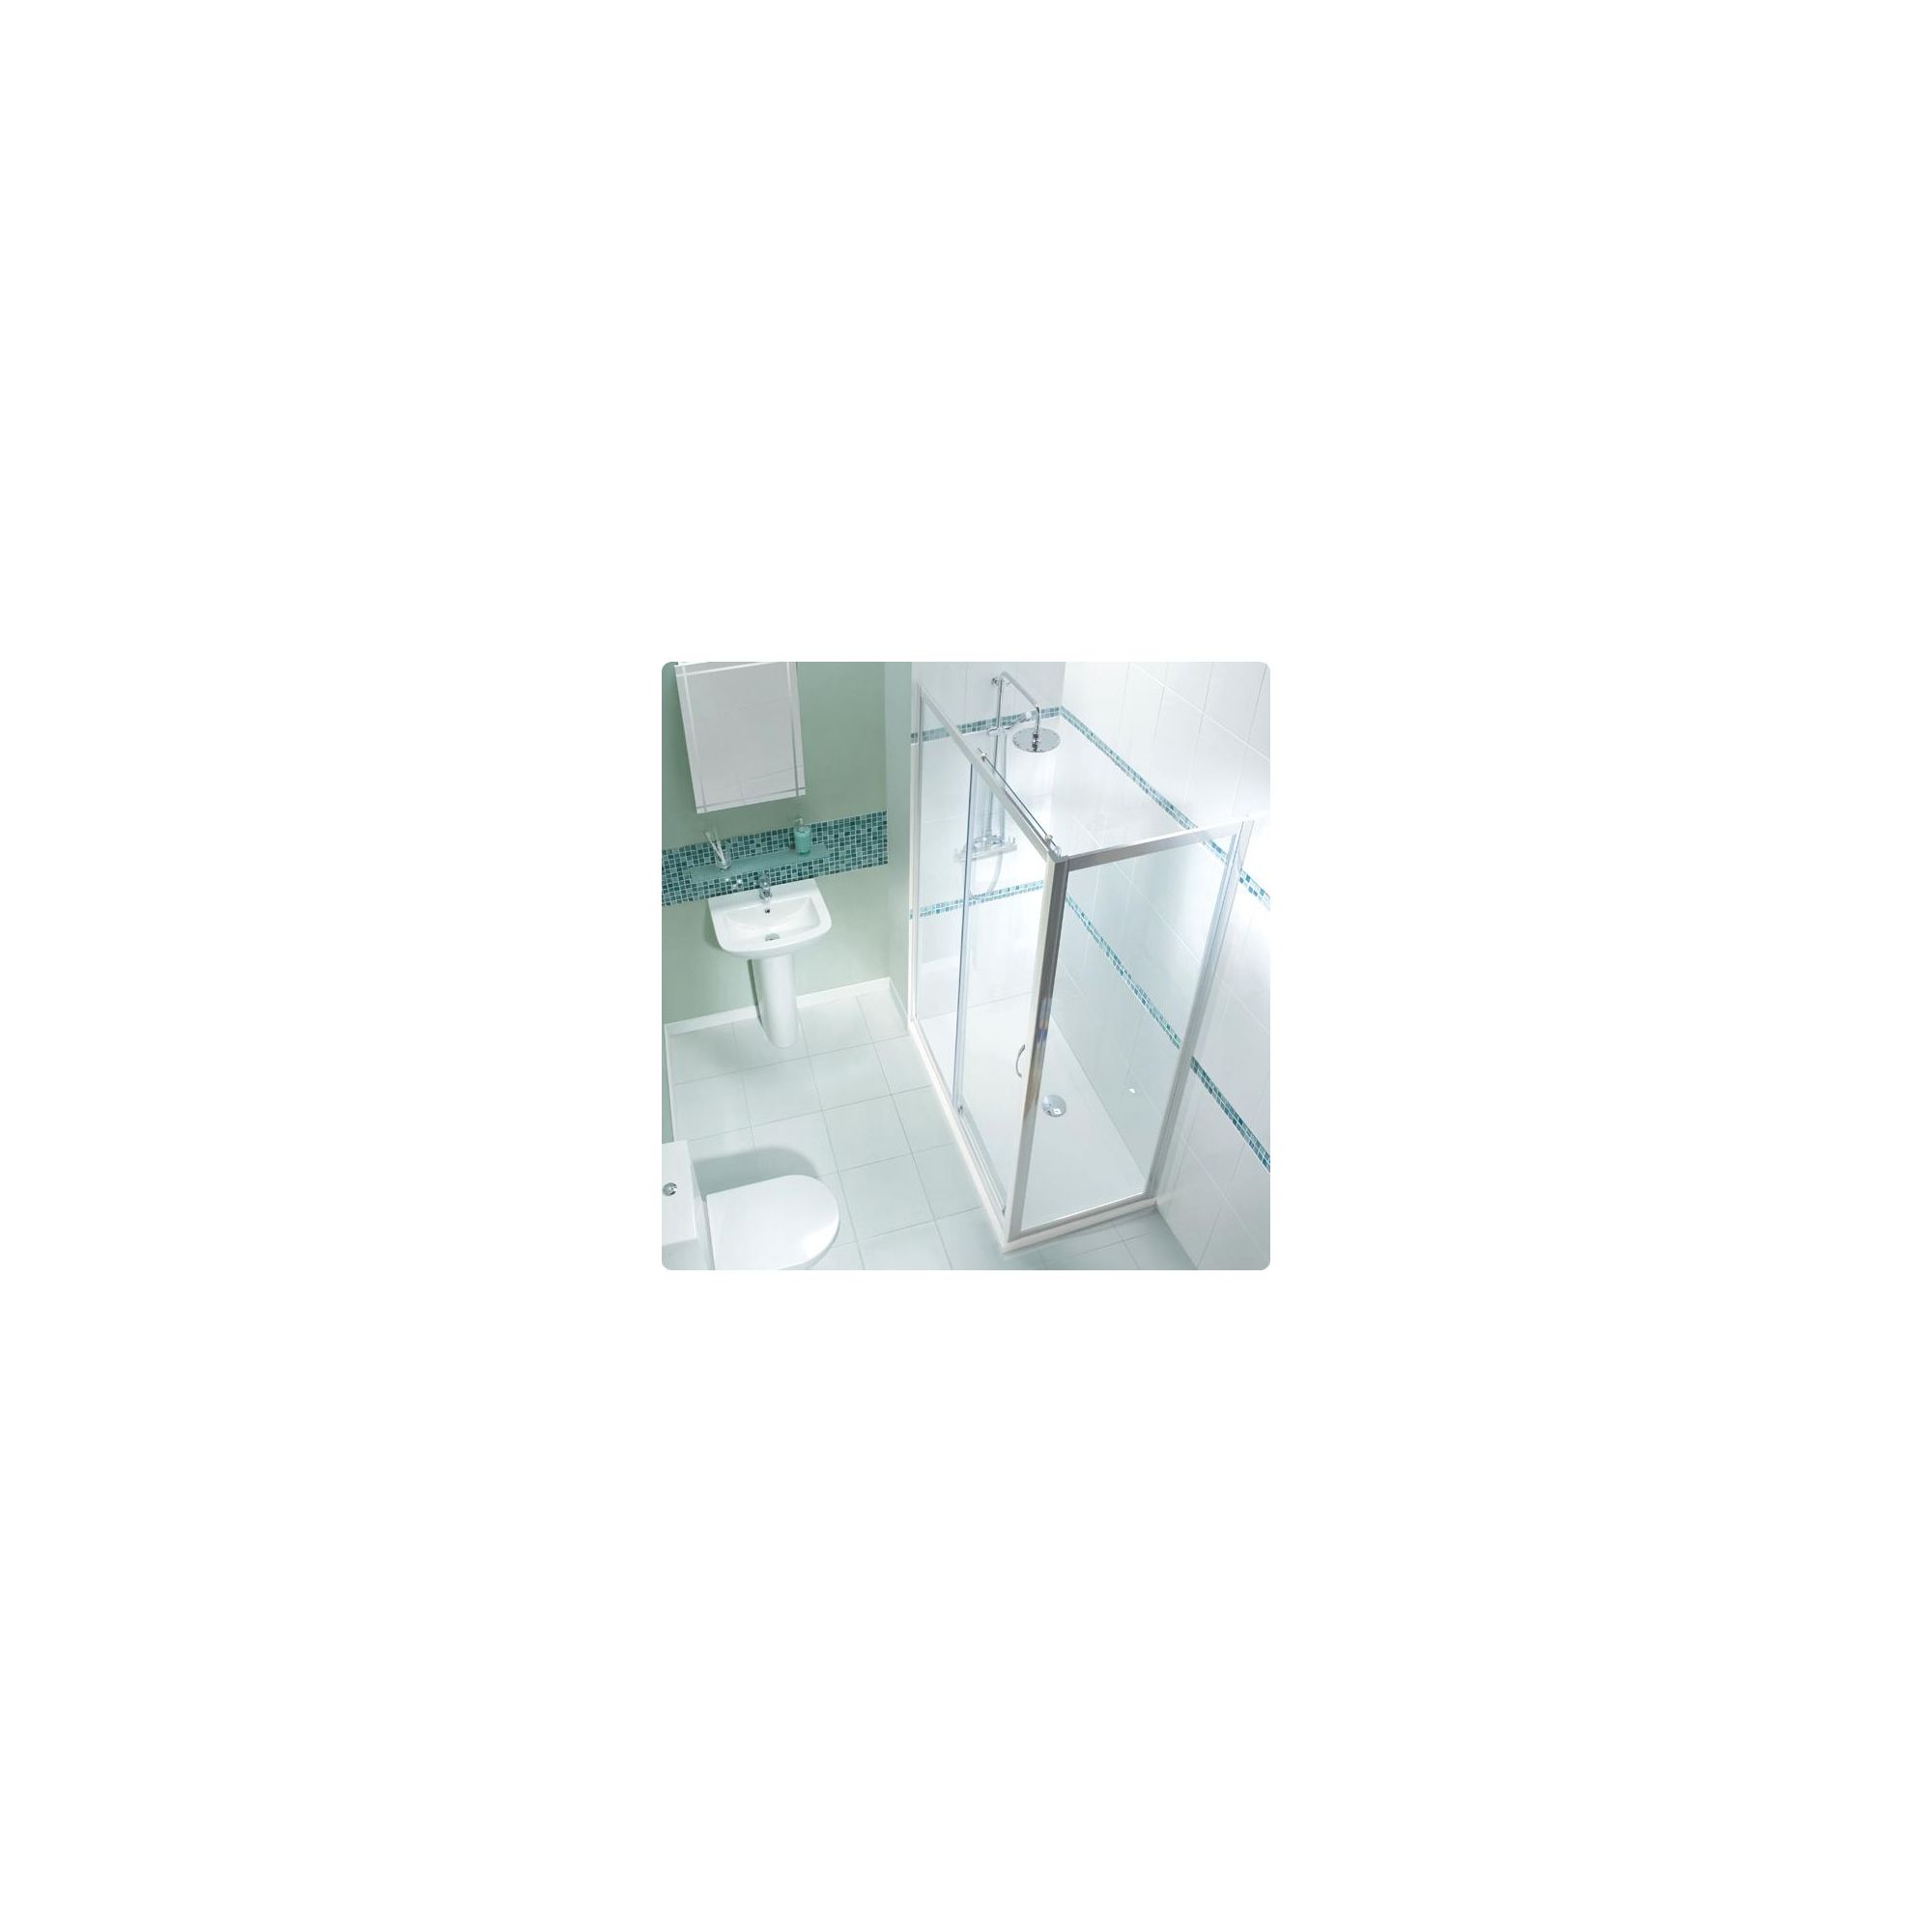 Balterley Framed Sliding Shower Enclosure, 1700mm x 700mm, Low Profile Tray, 6mm Glass at Tesco Direct